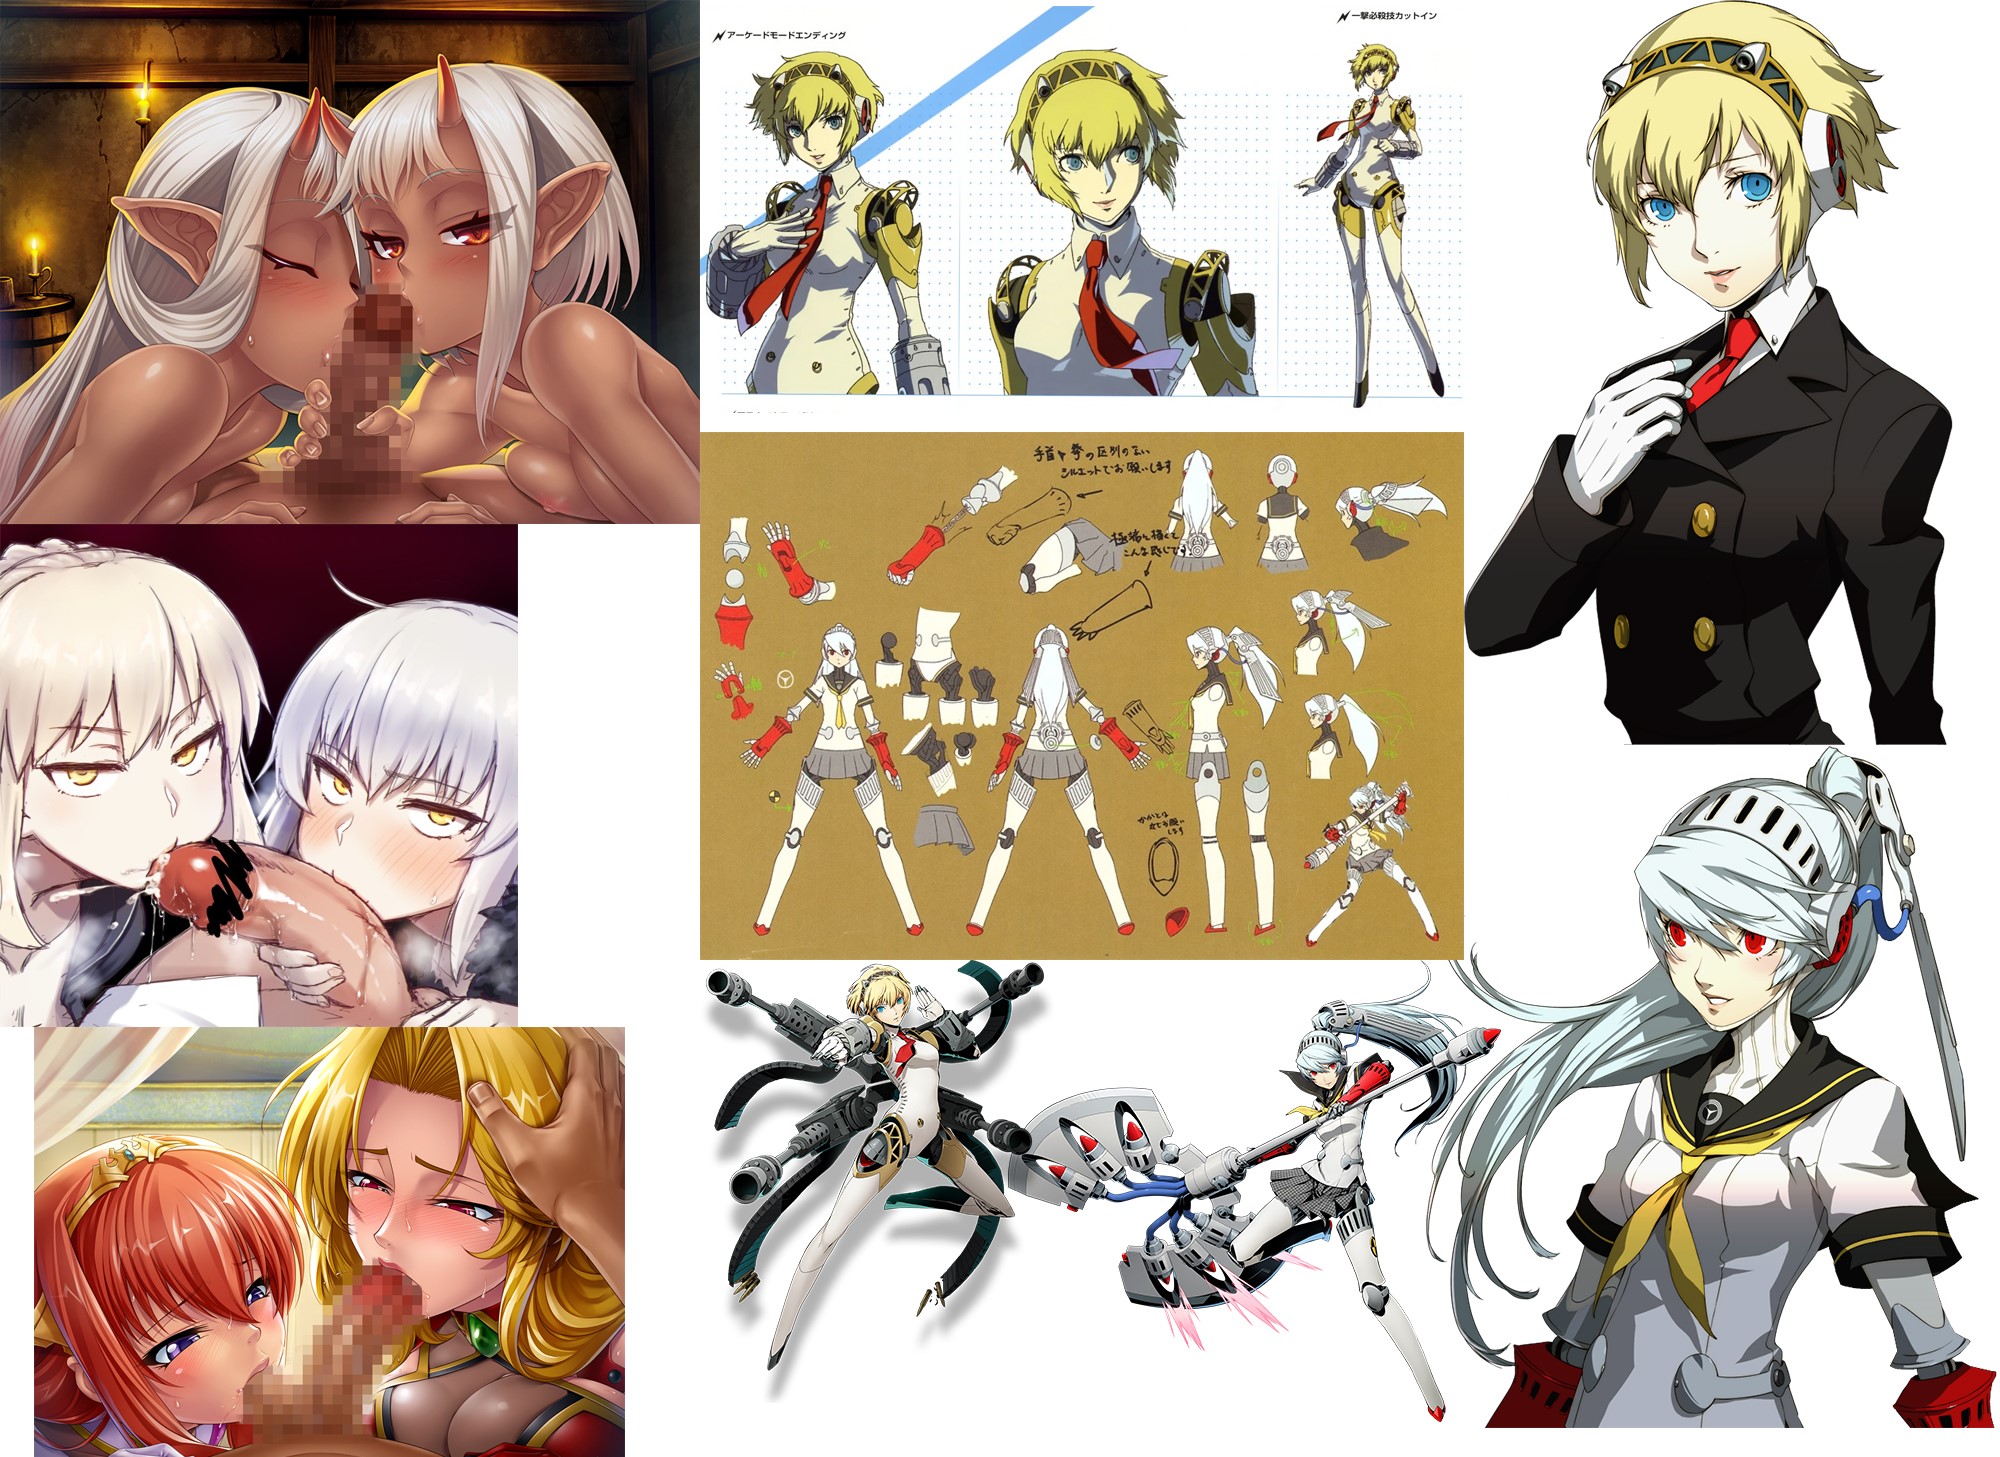 Labrys gimme something